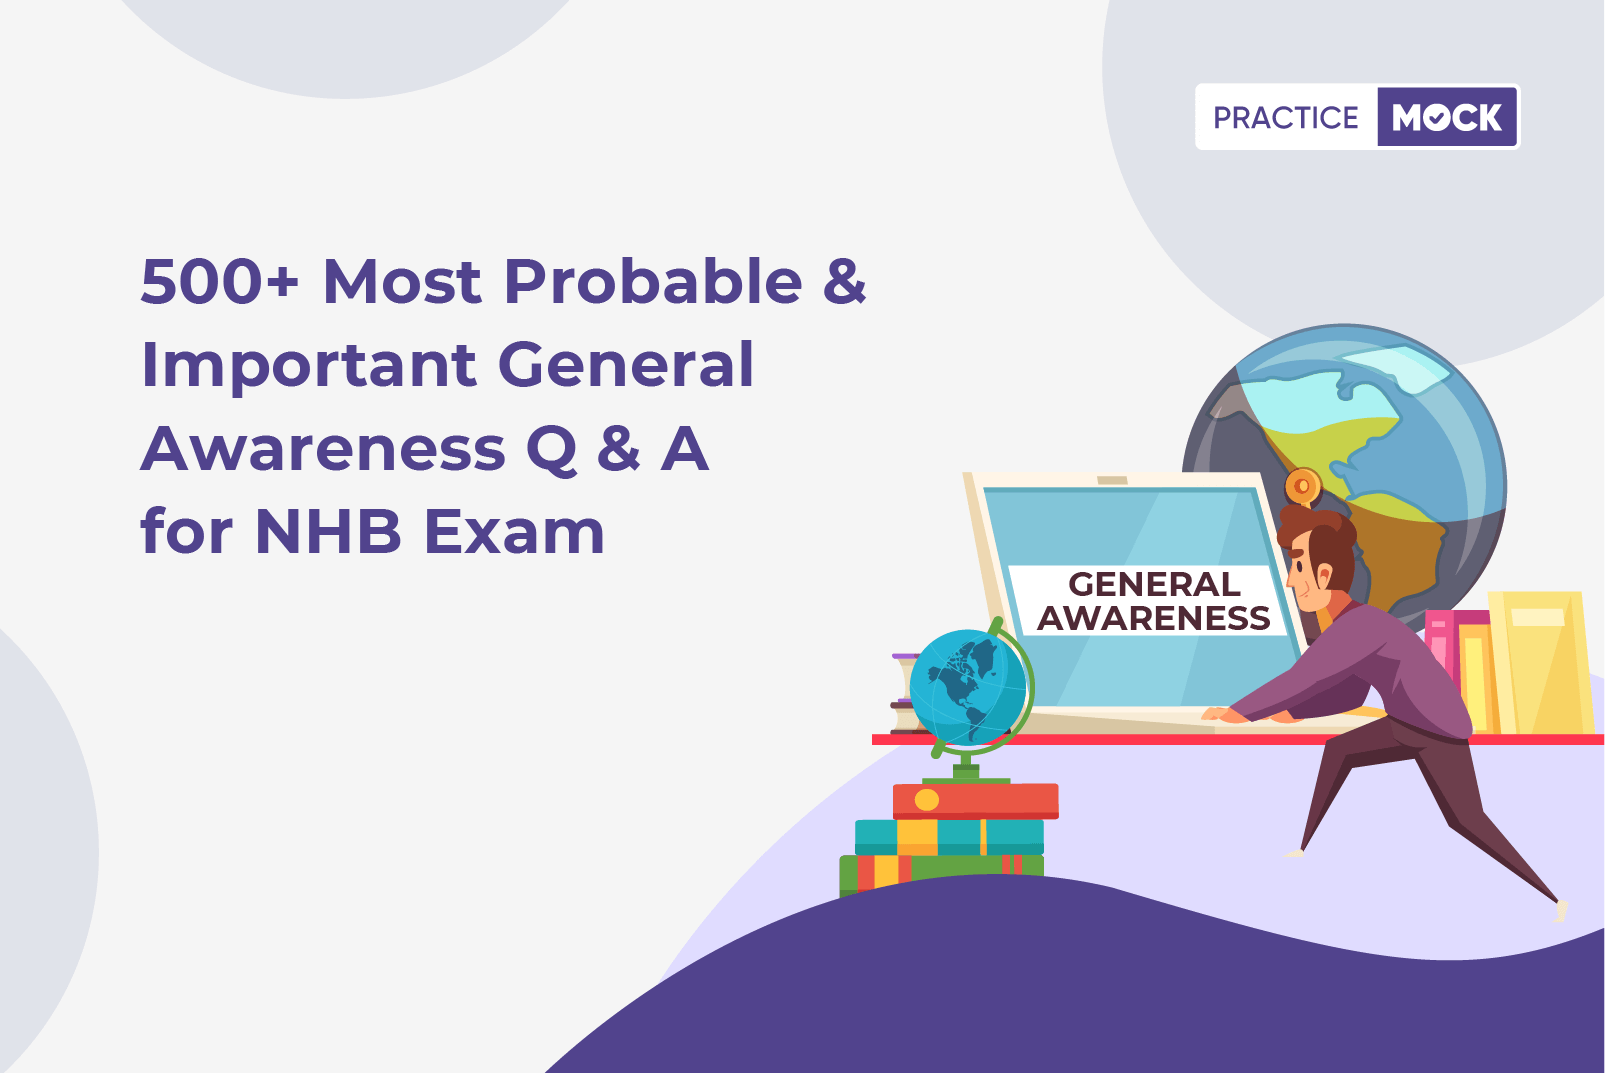 500+ Most Probable & Important General Awareness Q & A for NHB Exam